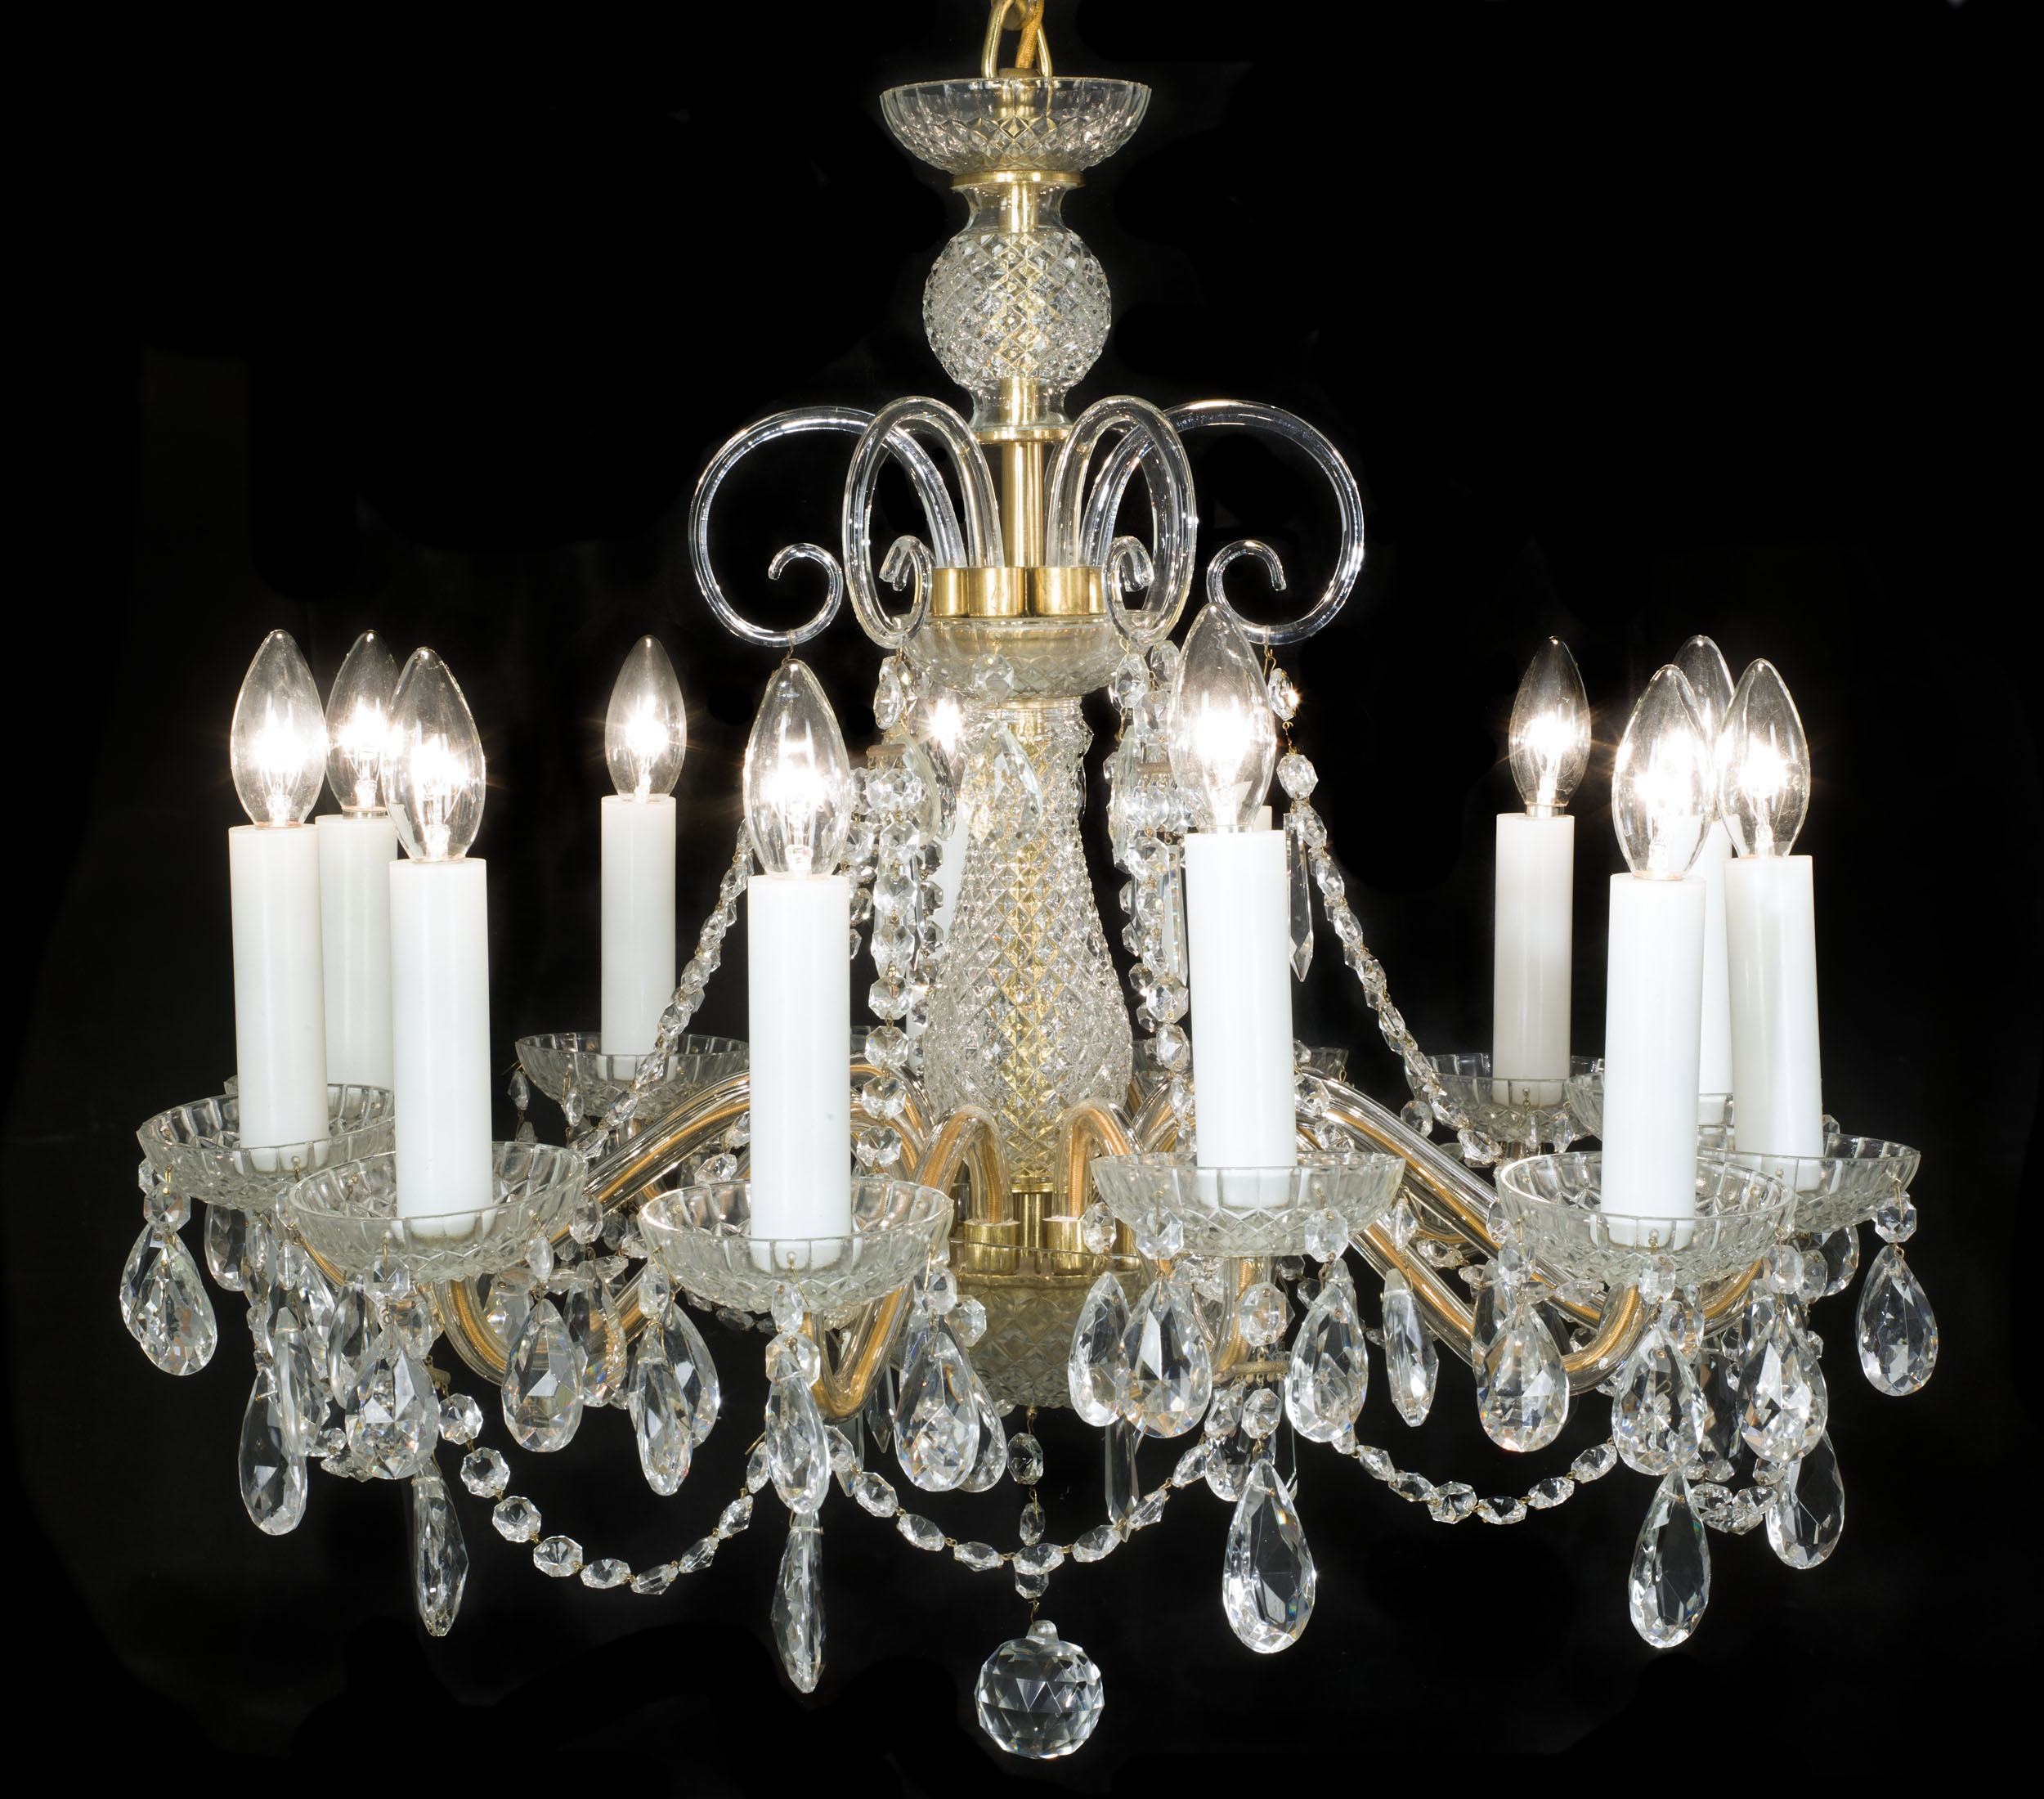 One of Four Identical Cut Glass Chandeliers